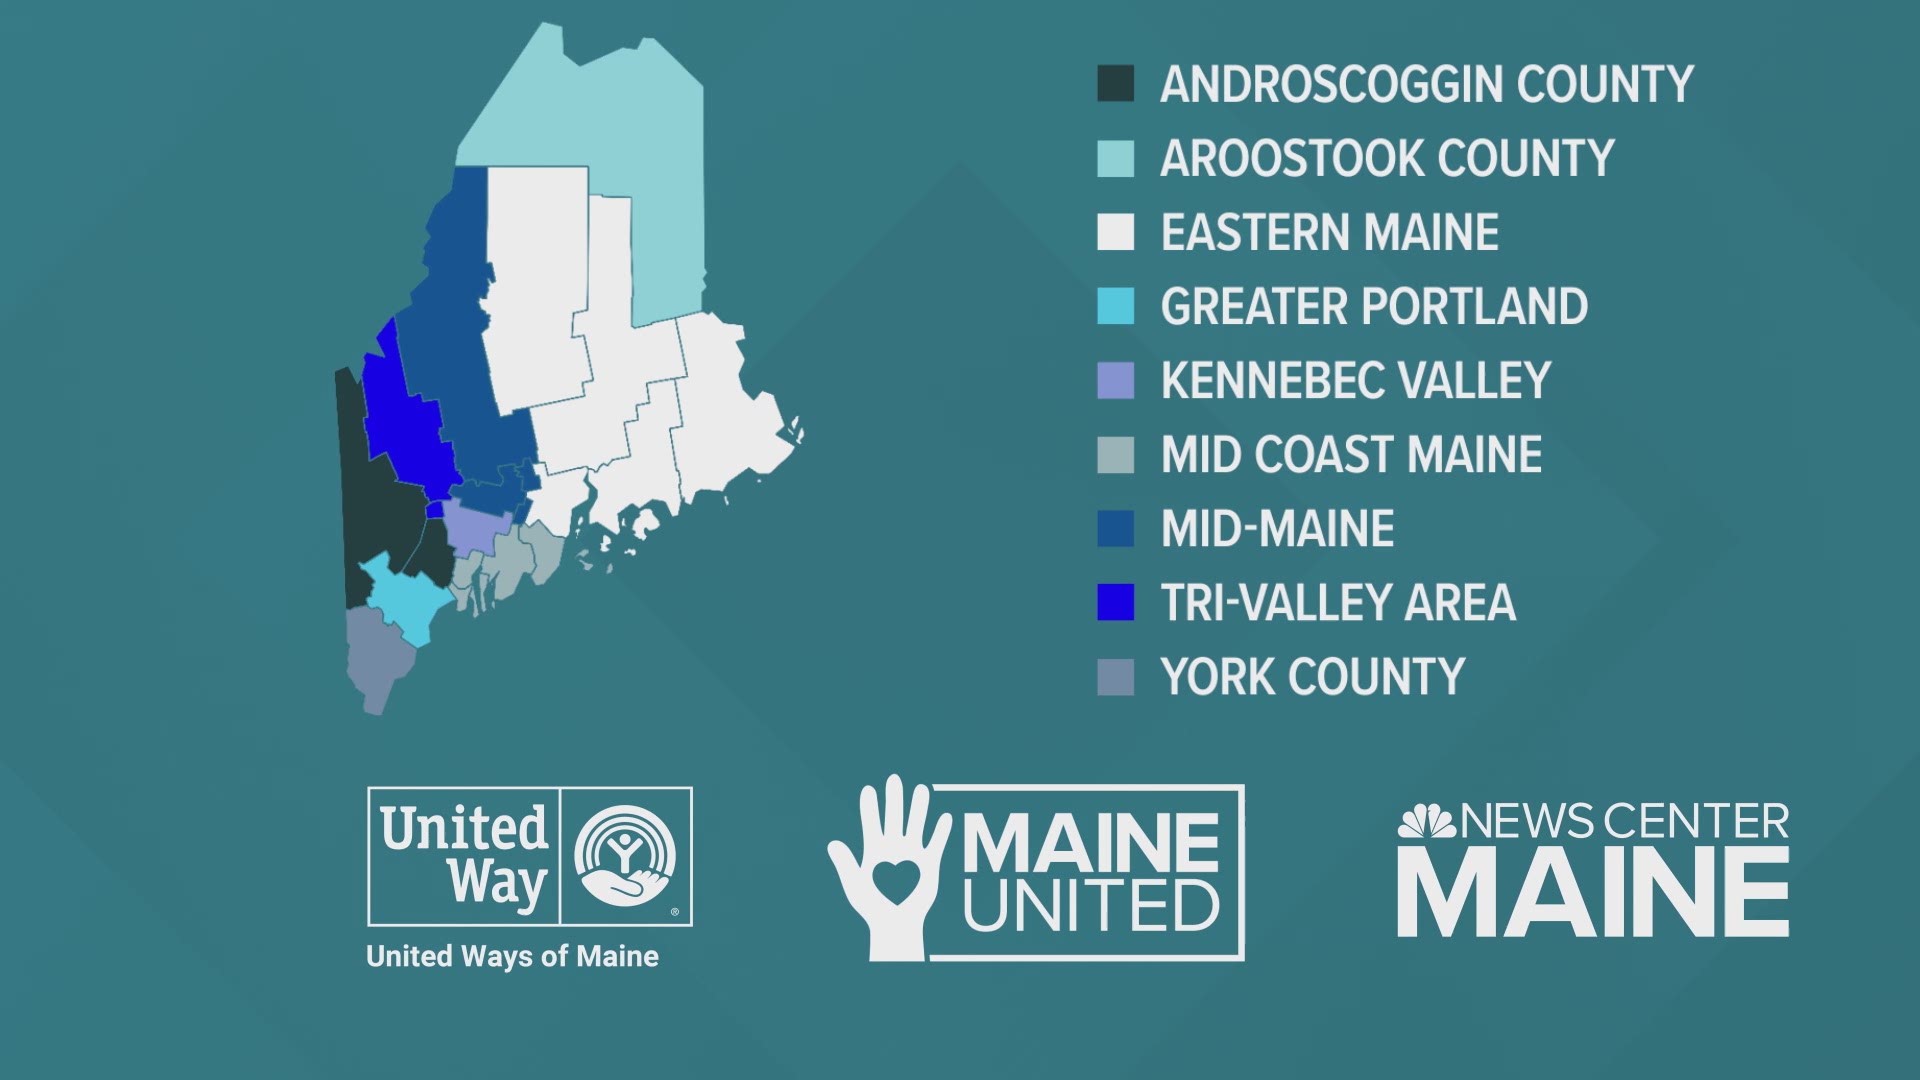 NEWS CENTER Maine has partnered with United Ways of Maine for Maine United.  The telethon starts, April 9, to raise money for those in need during coronavirus times